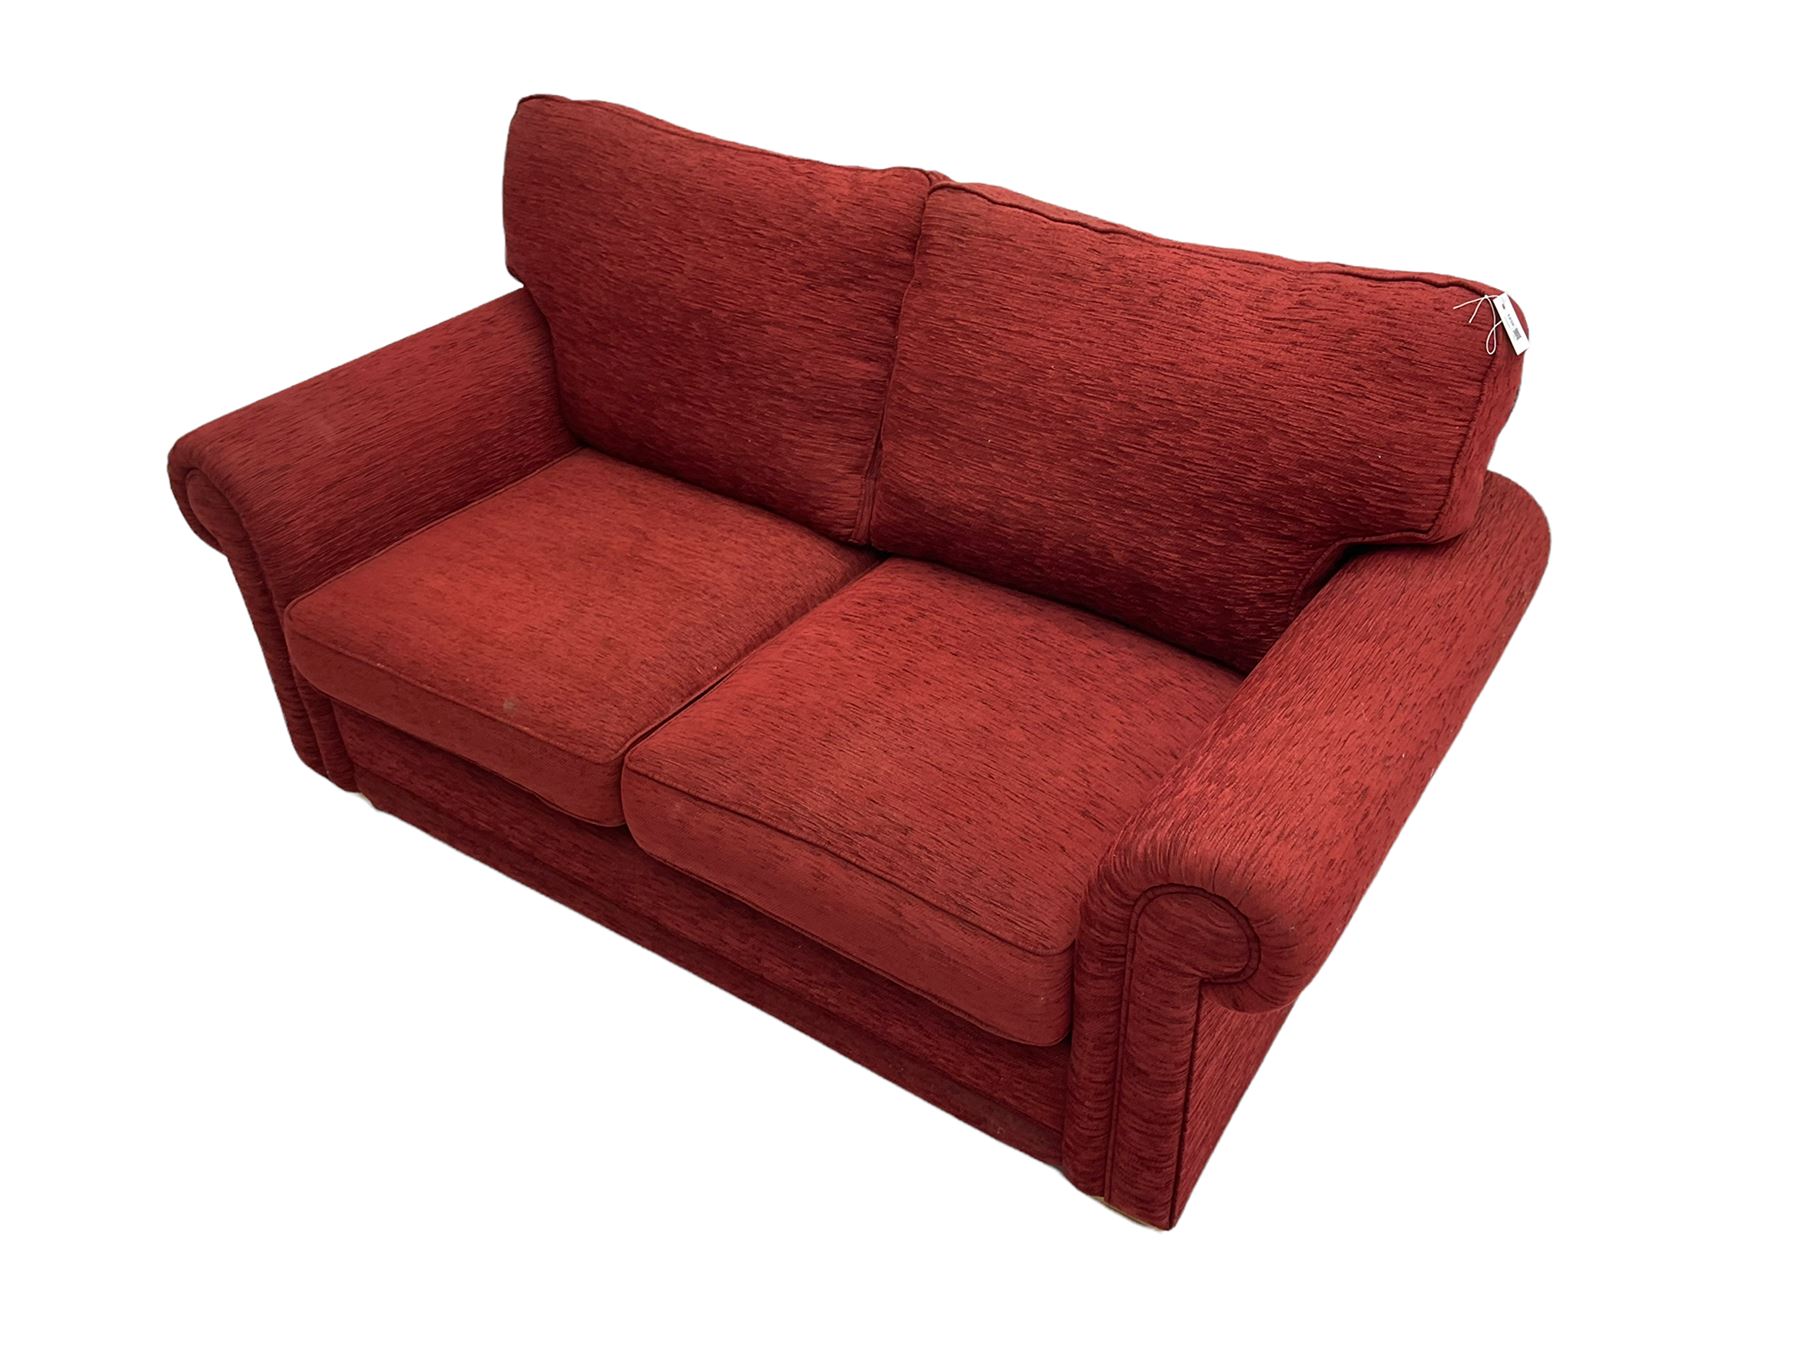 Two seat metal actions sofa bed upholstered in red cover - Image 4 of 6